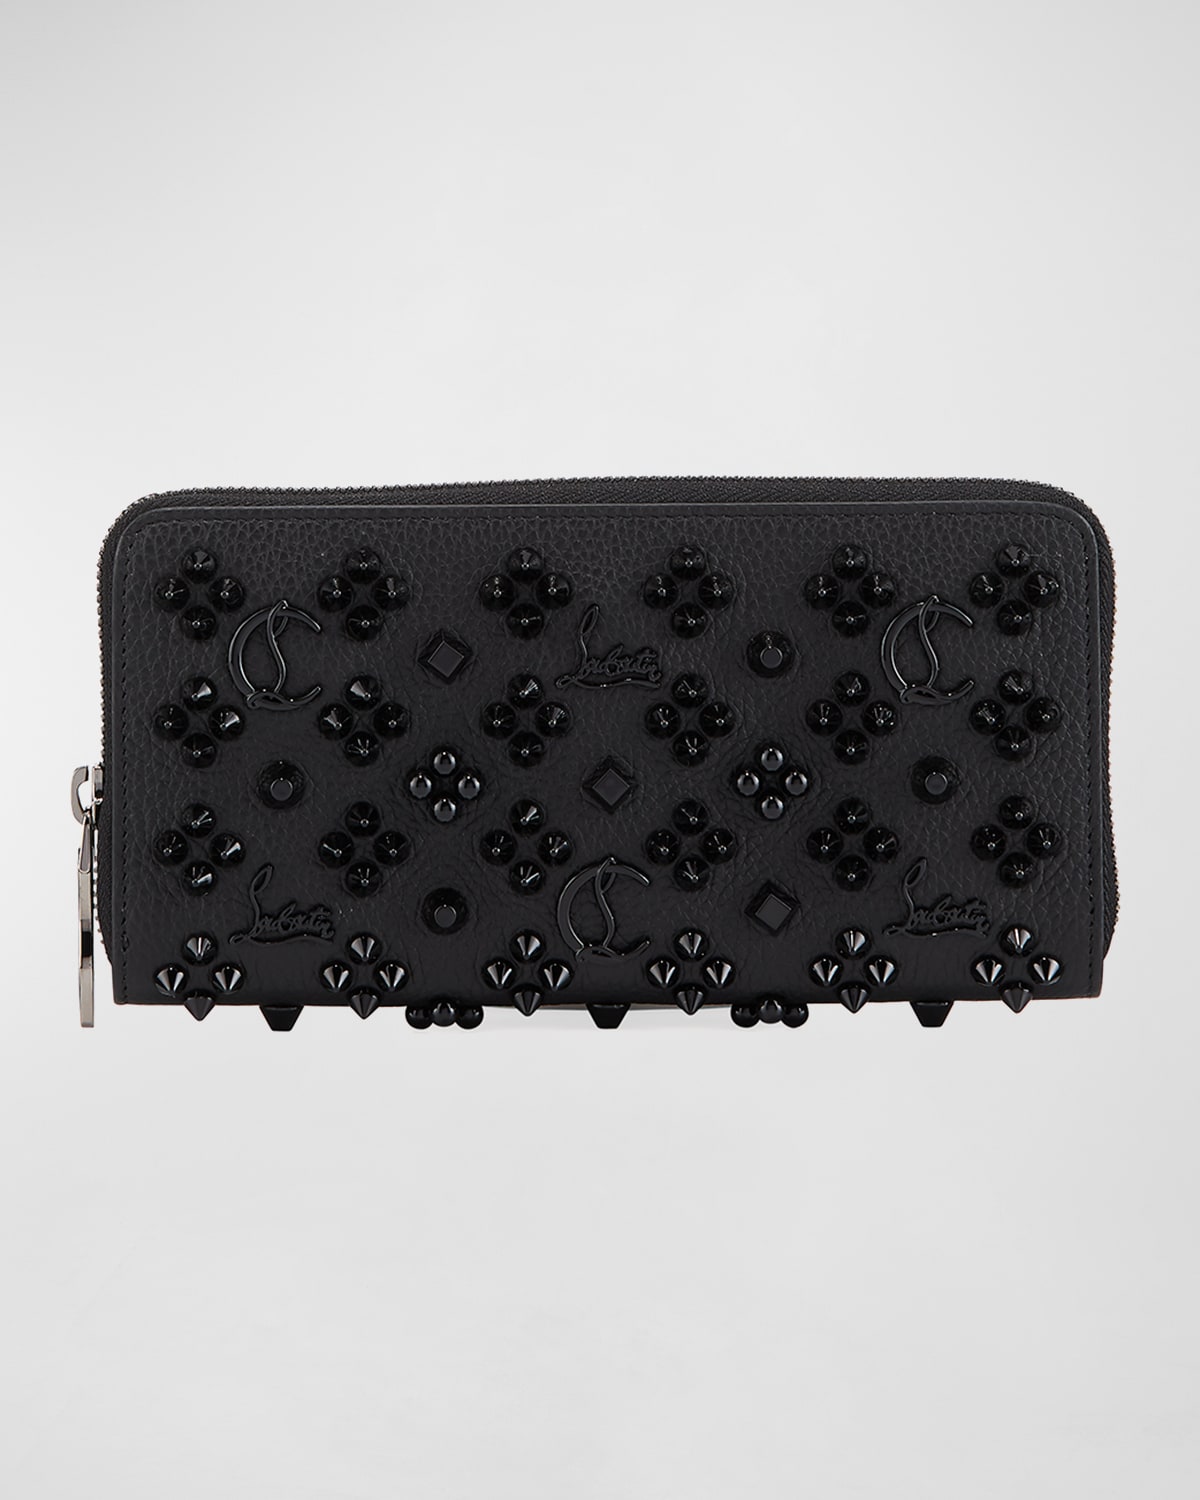 CHRISTIAN LOUBOUTIN PANETTONE WALLET IN LEATHER WITH LOUBINTHESKY SPIKES